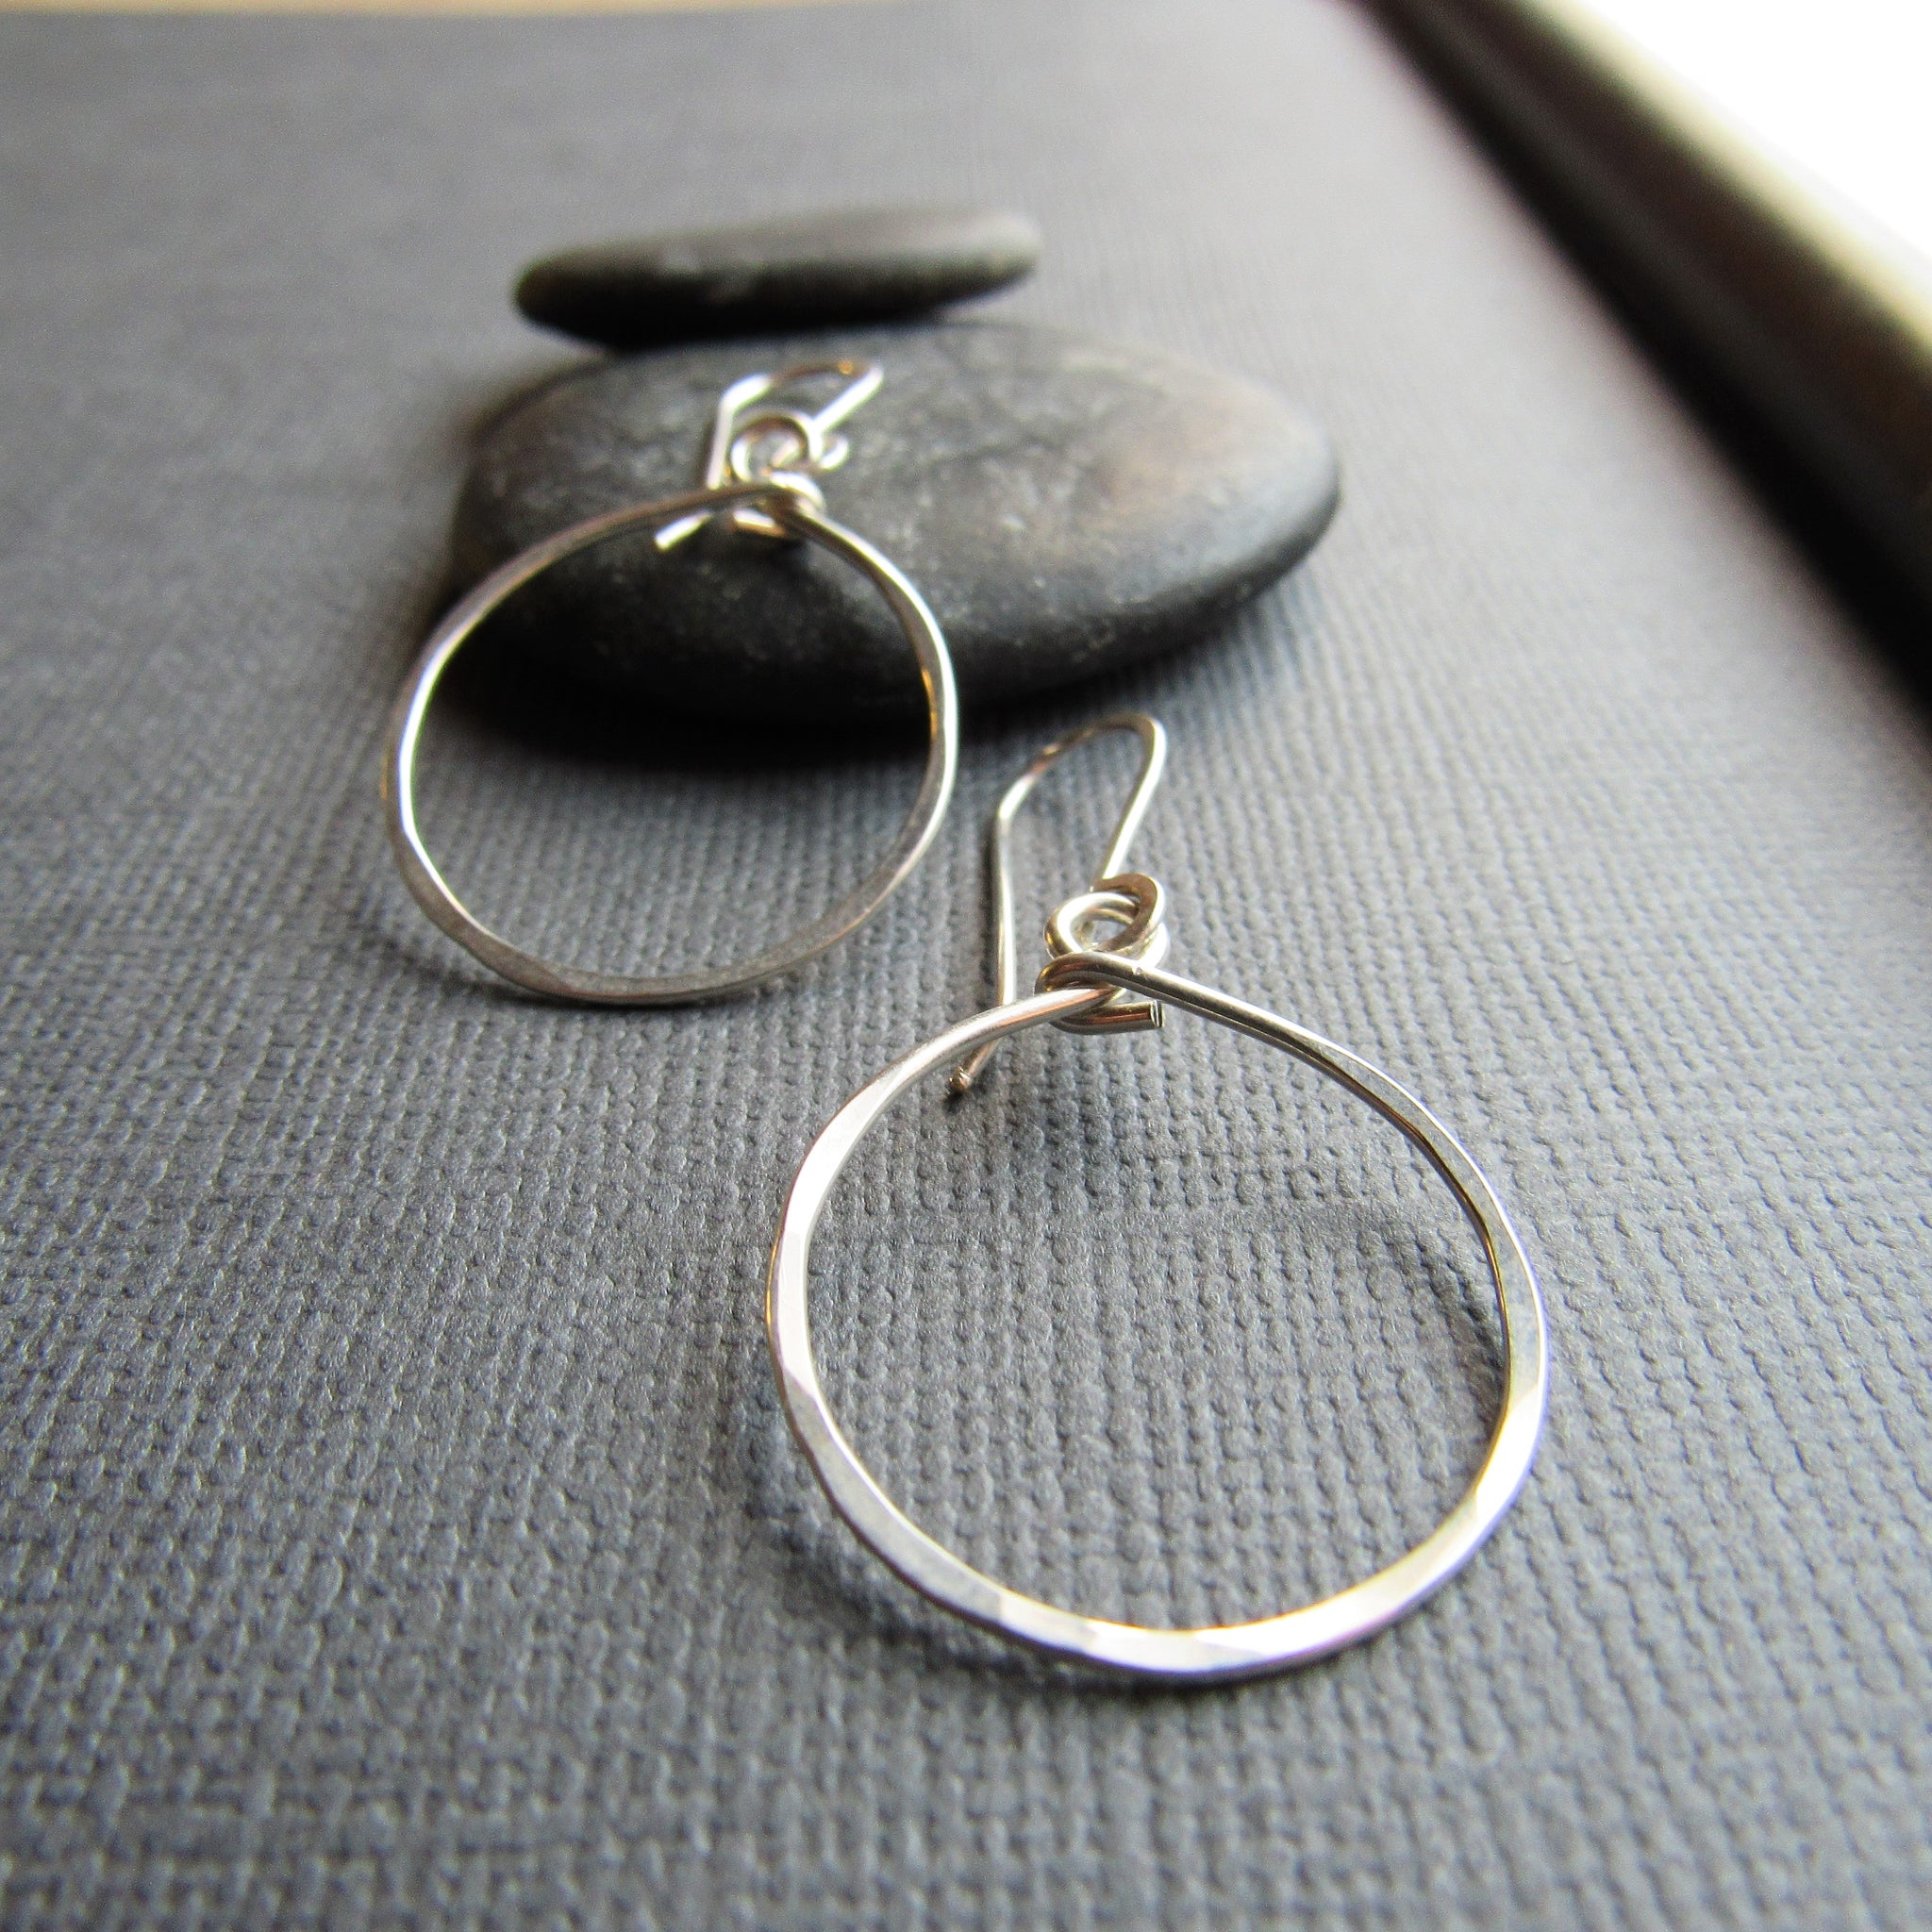 Round Ring Type Earring Oxidized Silver Color Hoop Earrings - Medium size